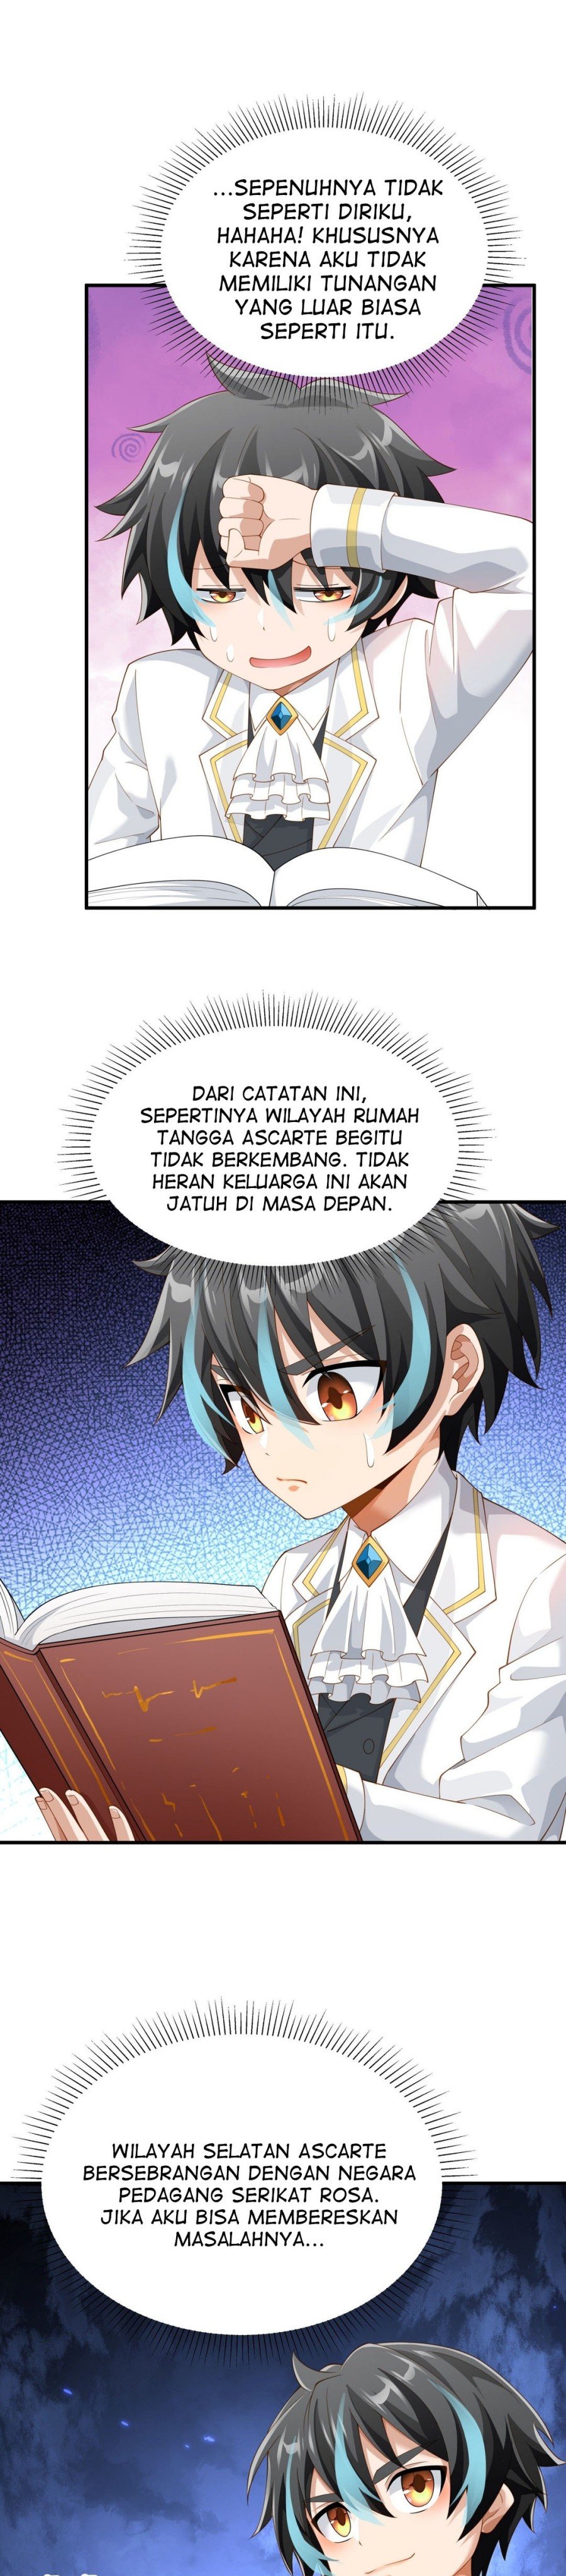 Dilarang COPAS - situs resmi www.mangacanblog.com - Komik little tyrant doesnt want to meet with a bad end 027 - chapter 27 28 Indonesia little tyrant doesnt want to meet with a bad end 027 - chapter 27 Terbaru 35|Baca Manga Komik Indonesia|Mangacan